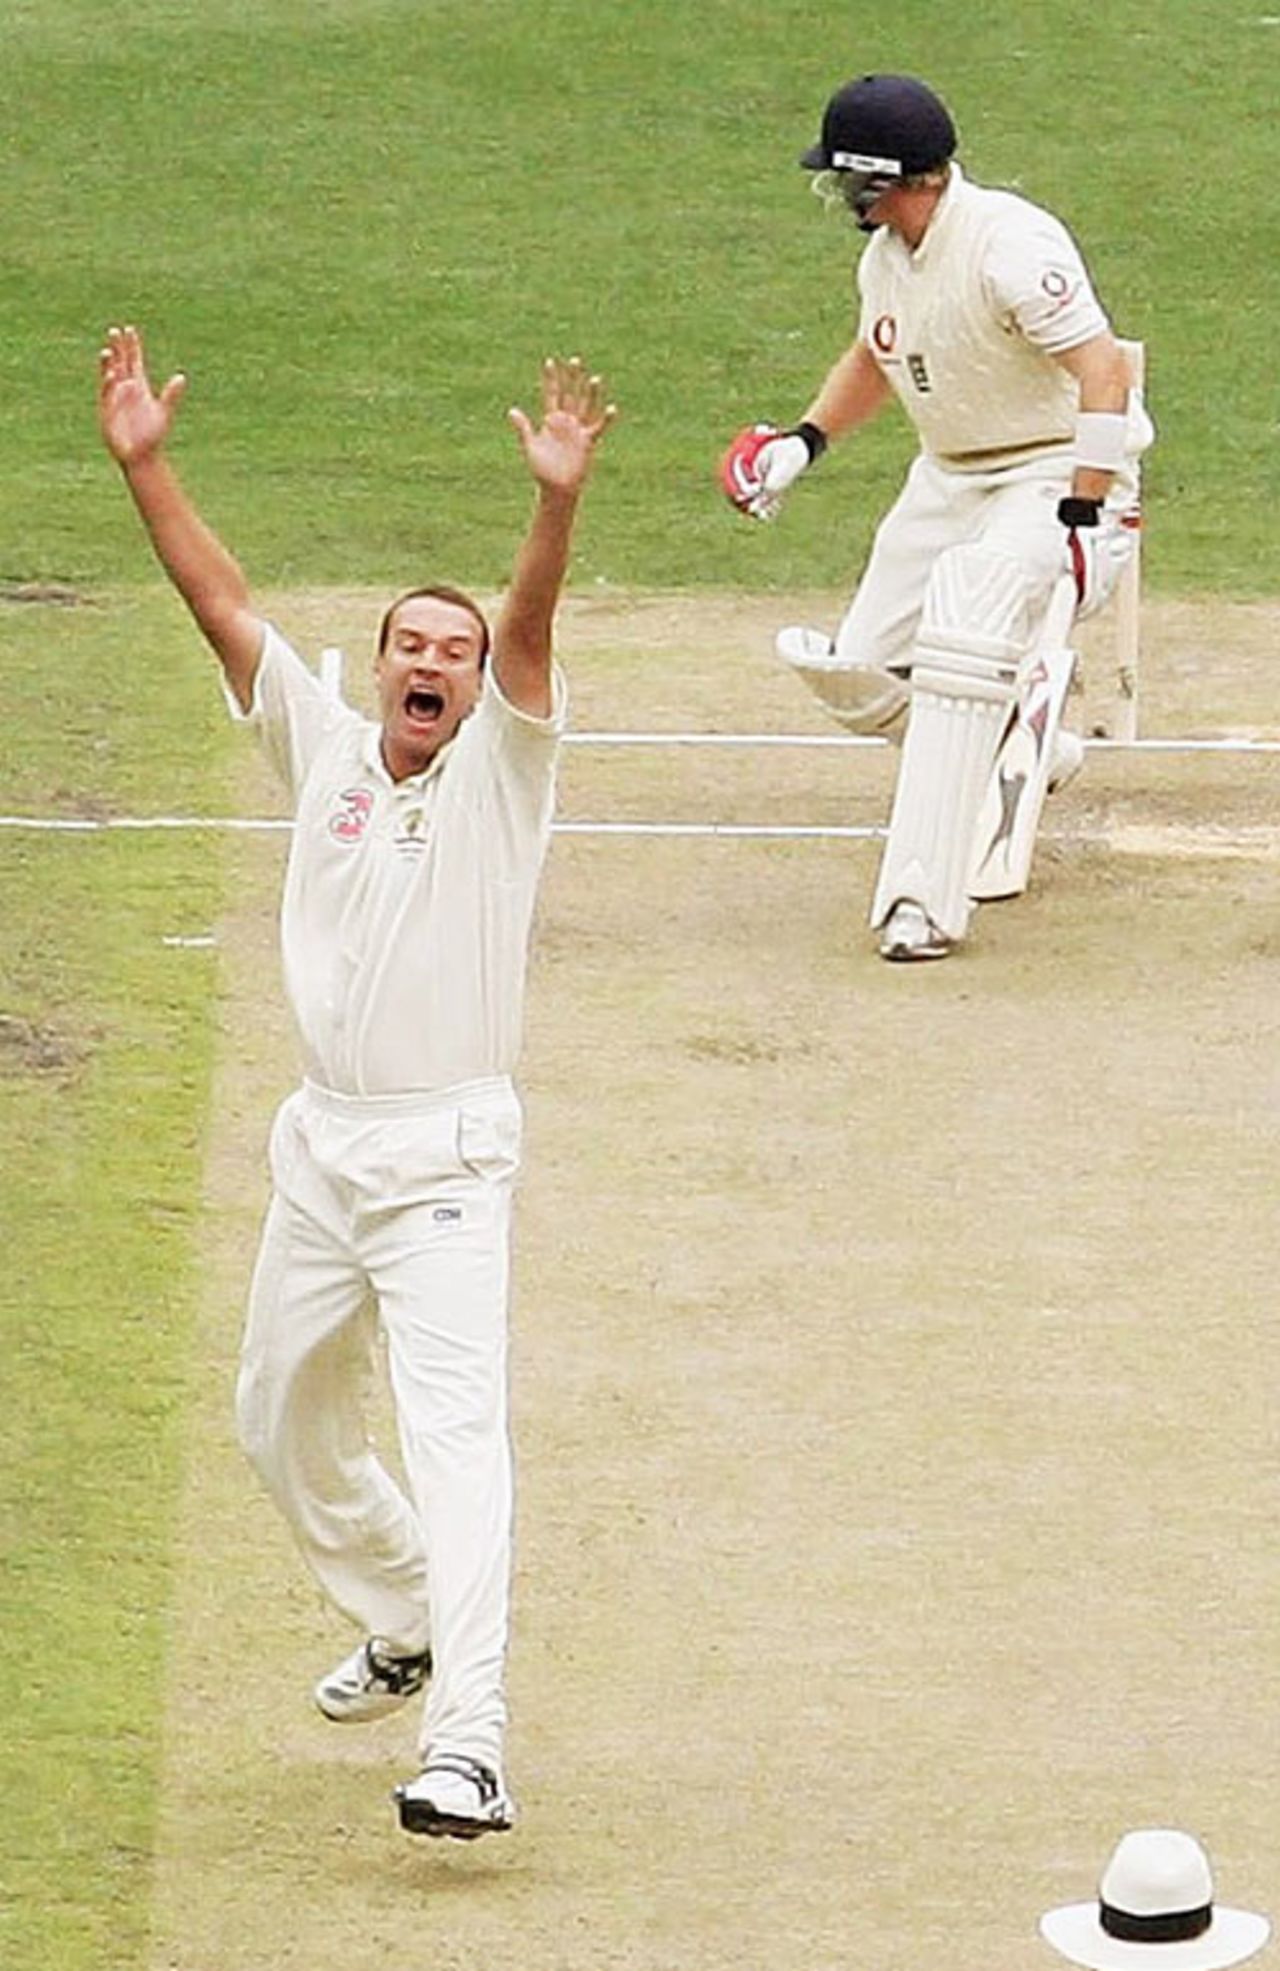 Stuart Clark claims the second wicket after England elected to bat, trapping Ian Bell lbw in the rain-affected second session, Australia v England, 4th Test, Melbourne, December 26, 2006